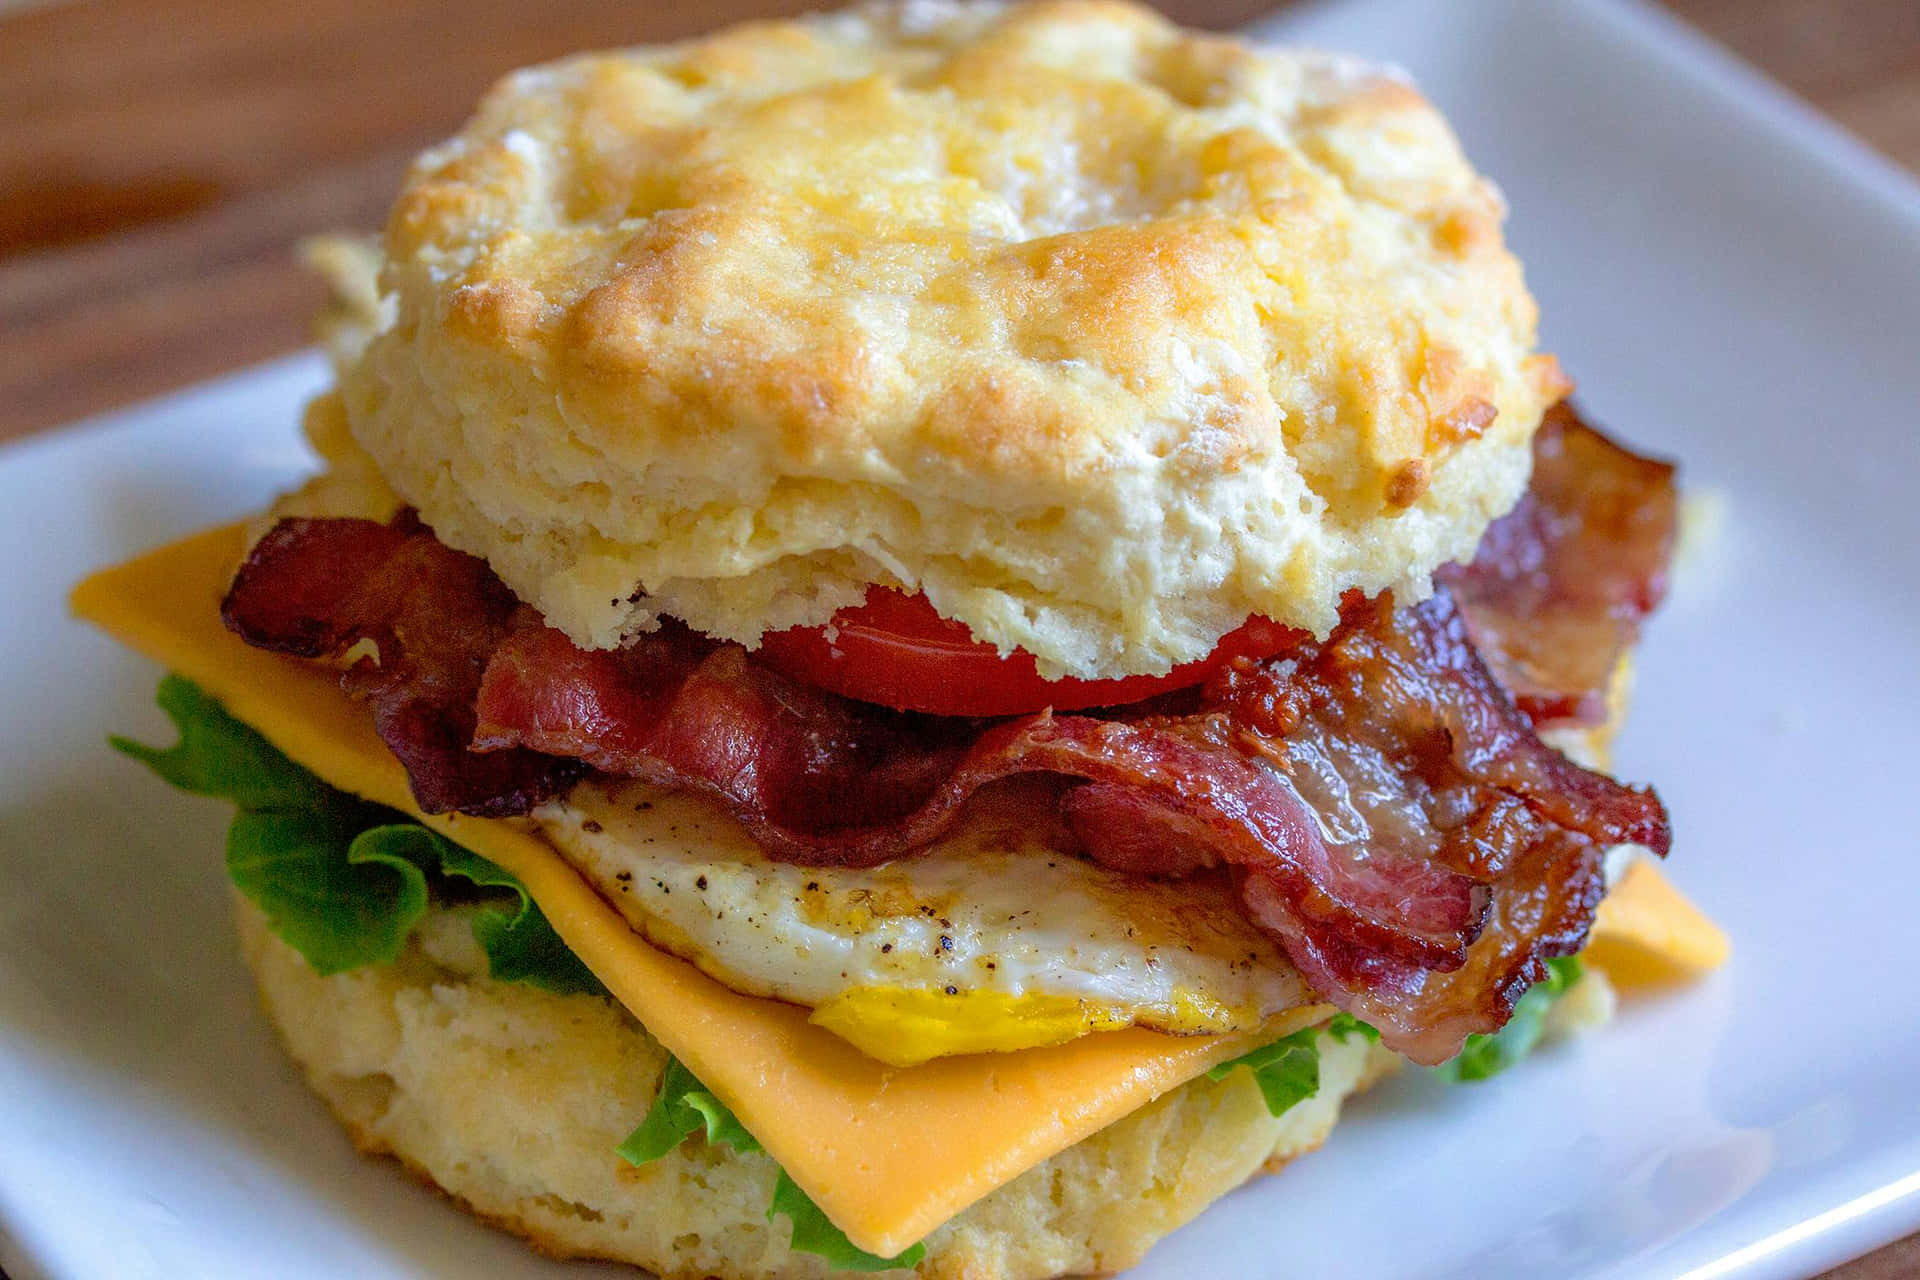 Bacon Egg Cheese Biscuit Sandwich.jpg Background